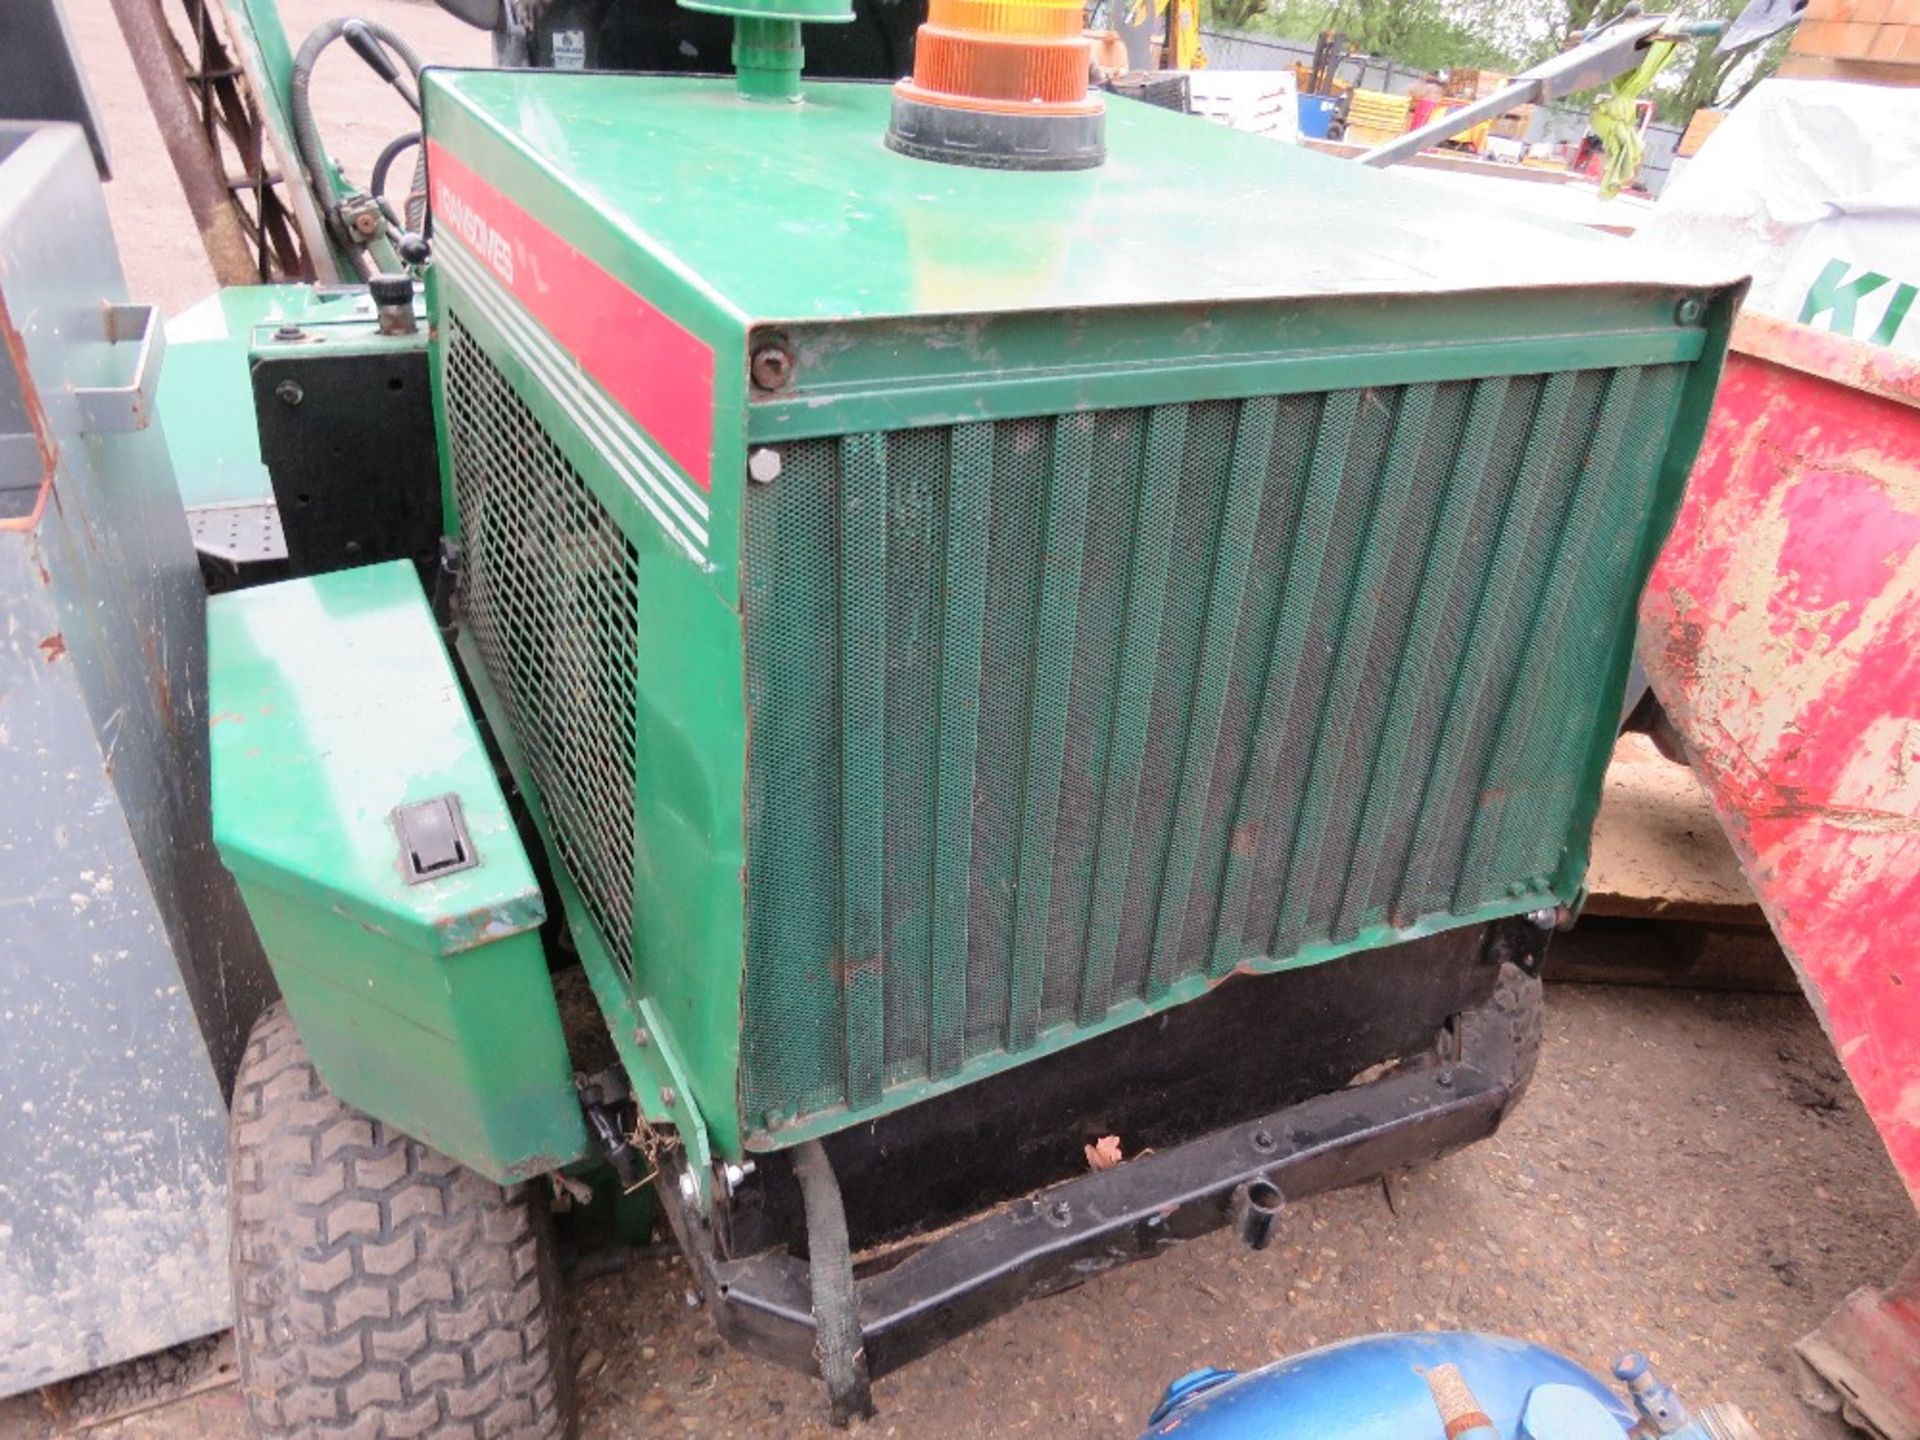 RANSOMES 213 TRIPLE RIDE ON CYLINDER MOWER WITH KUBOTA ENGINE. WHEN TESTED WAS SEEN TO DRIVE, STEER, - Image 4 of 11